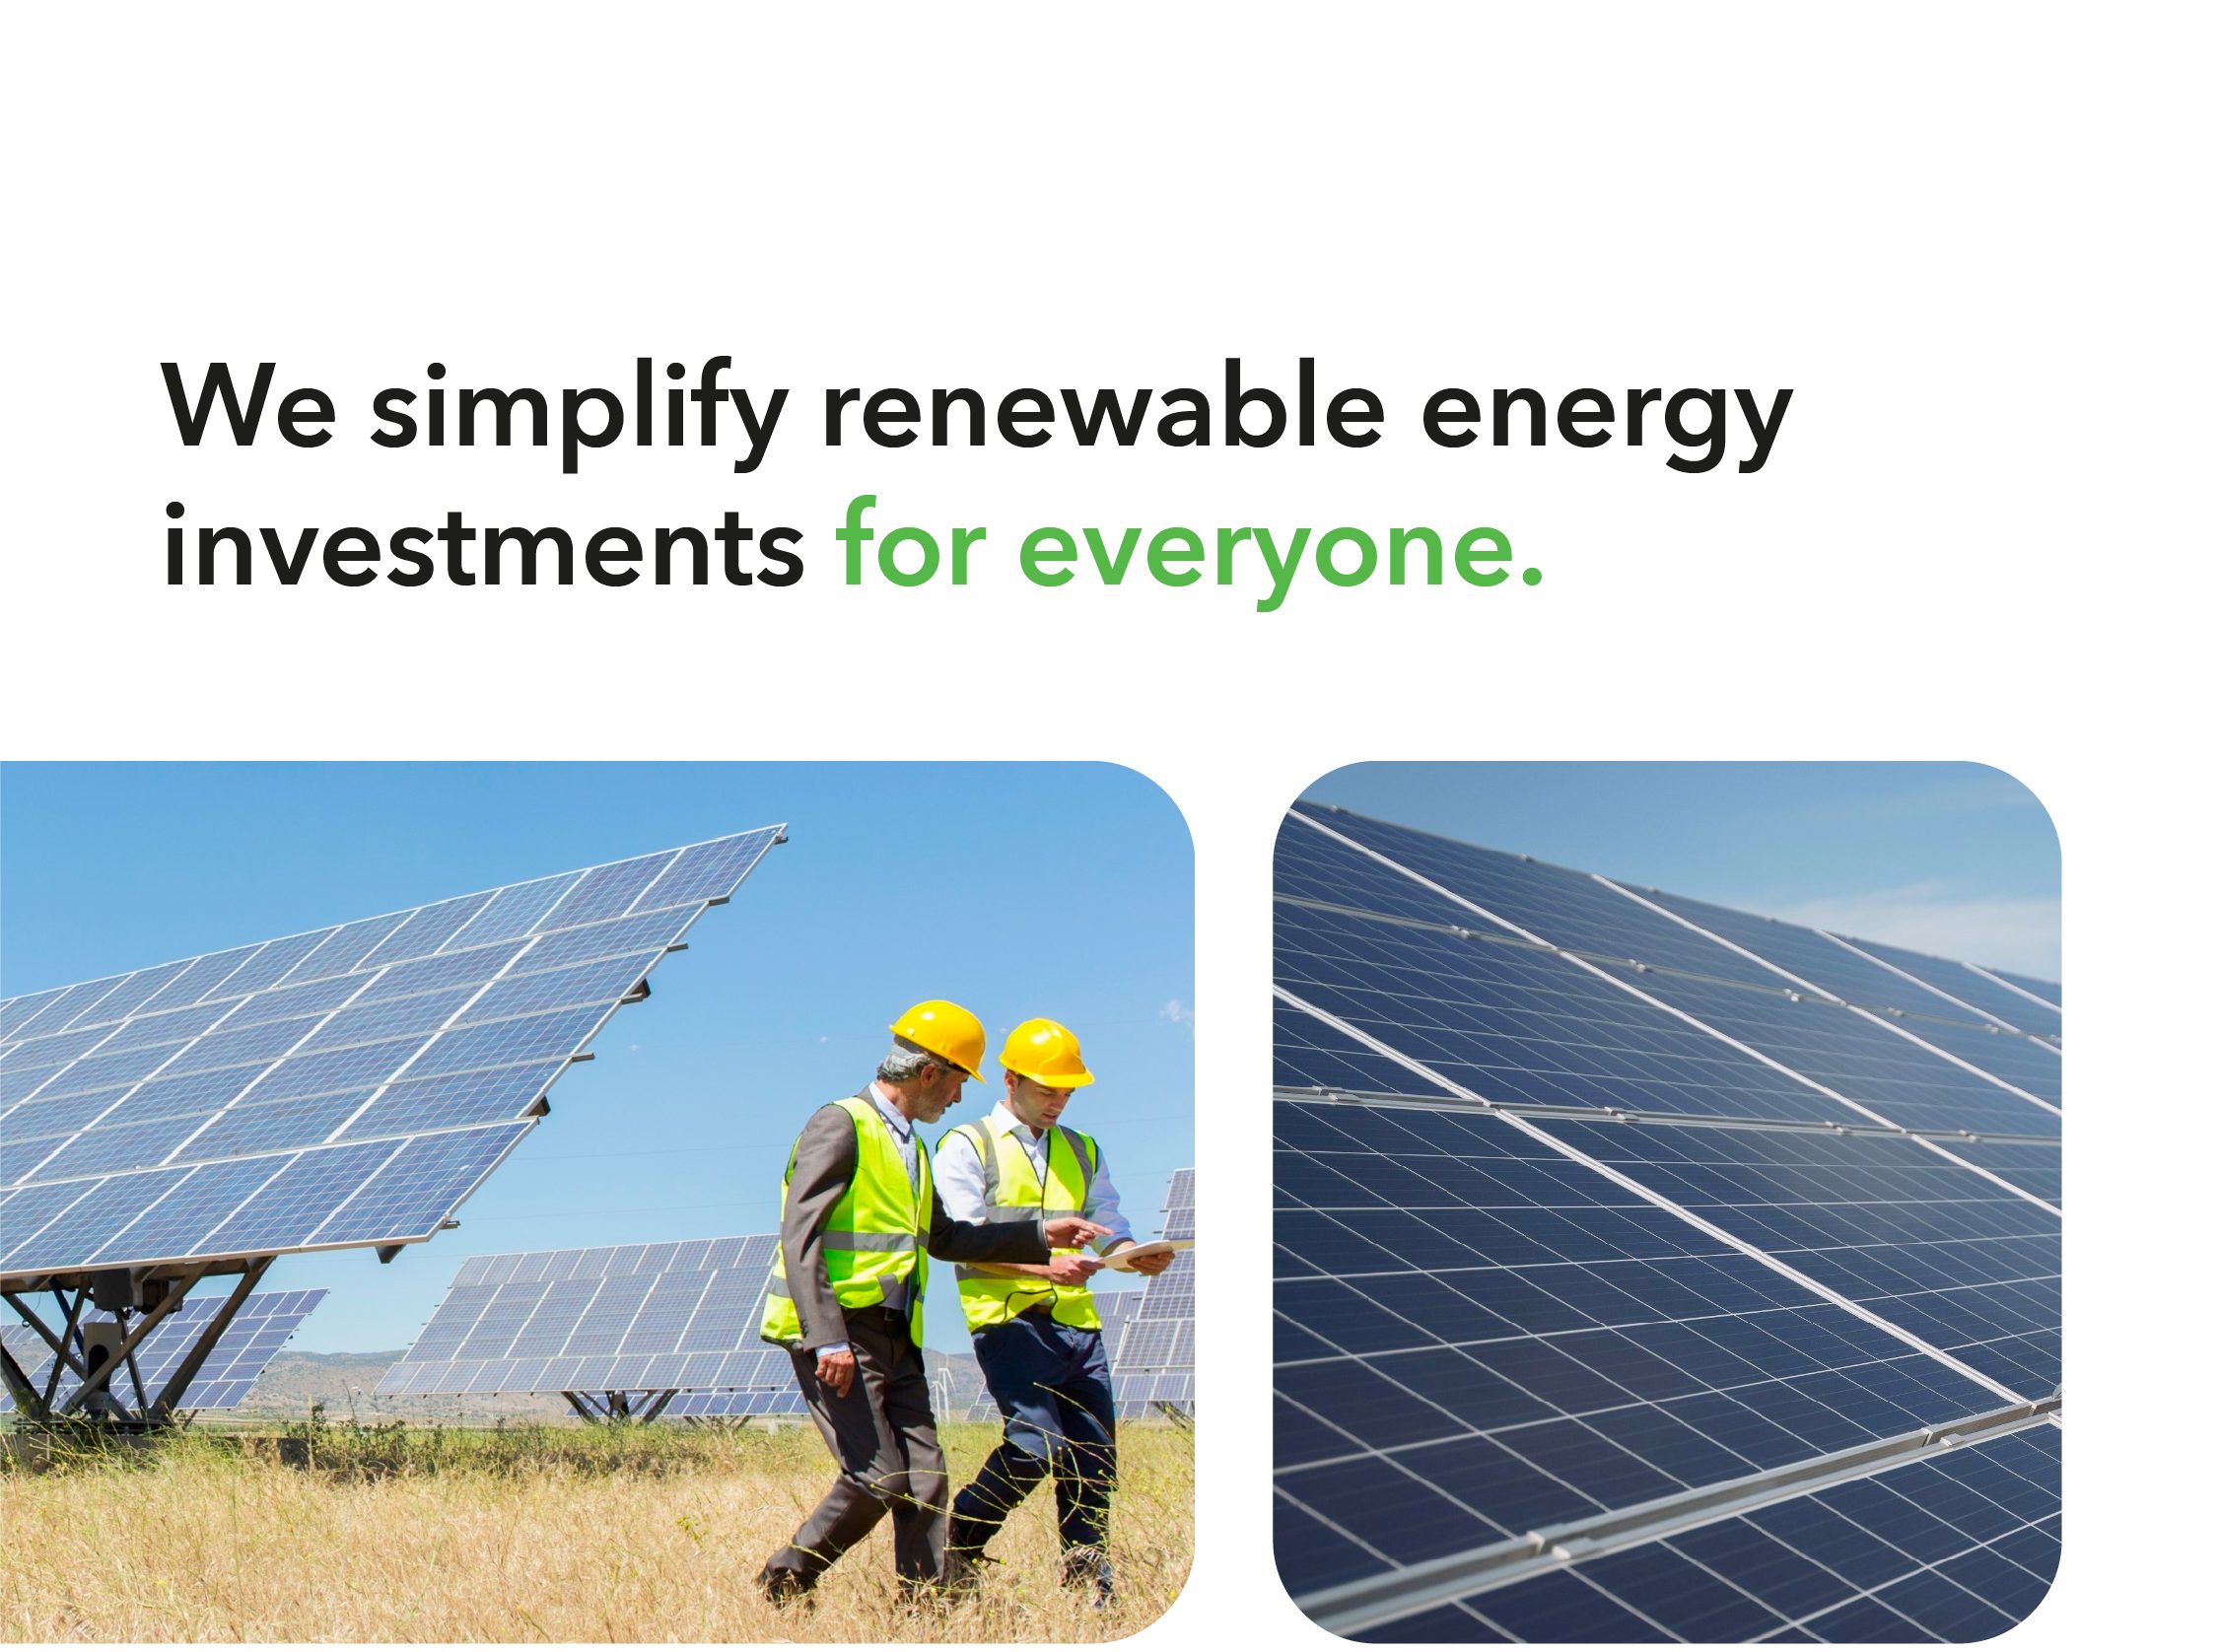 About Green Energy Allies